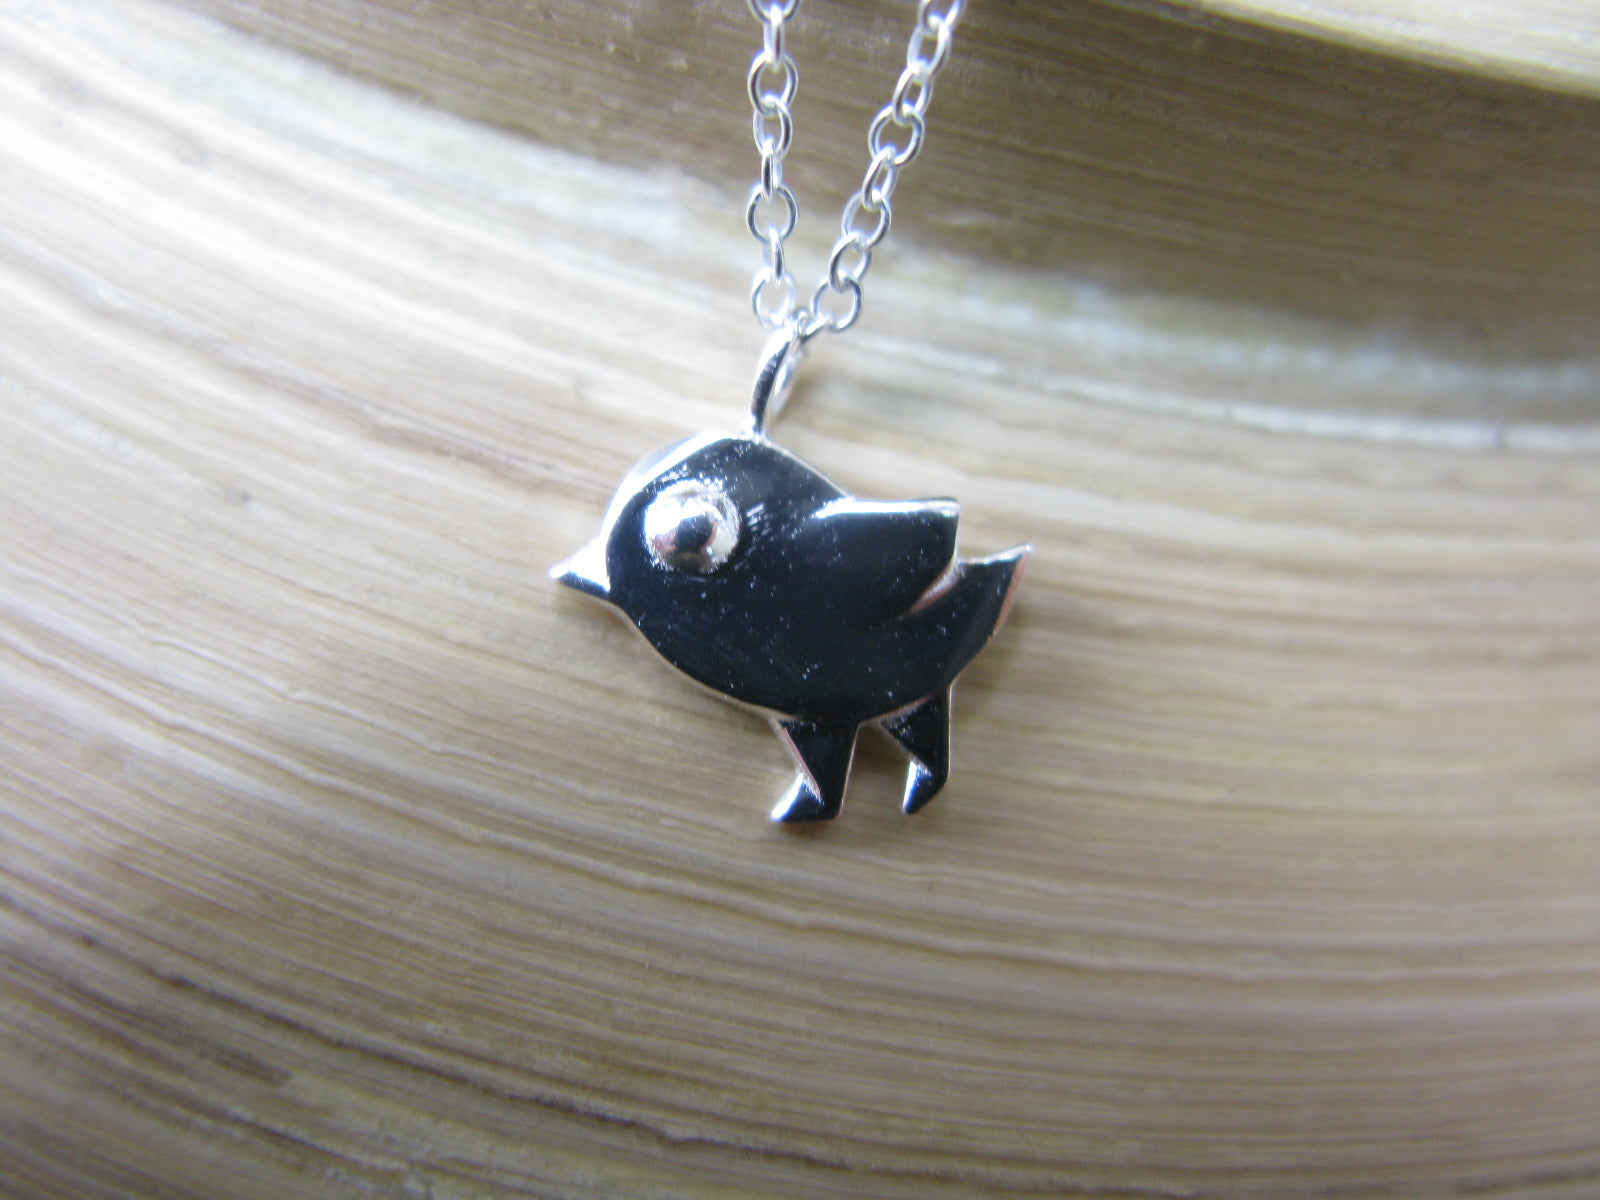 Origami Bird Pendant Chain Necklace in 925 Sterling Silver